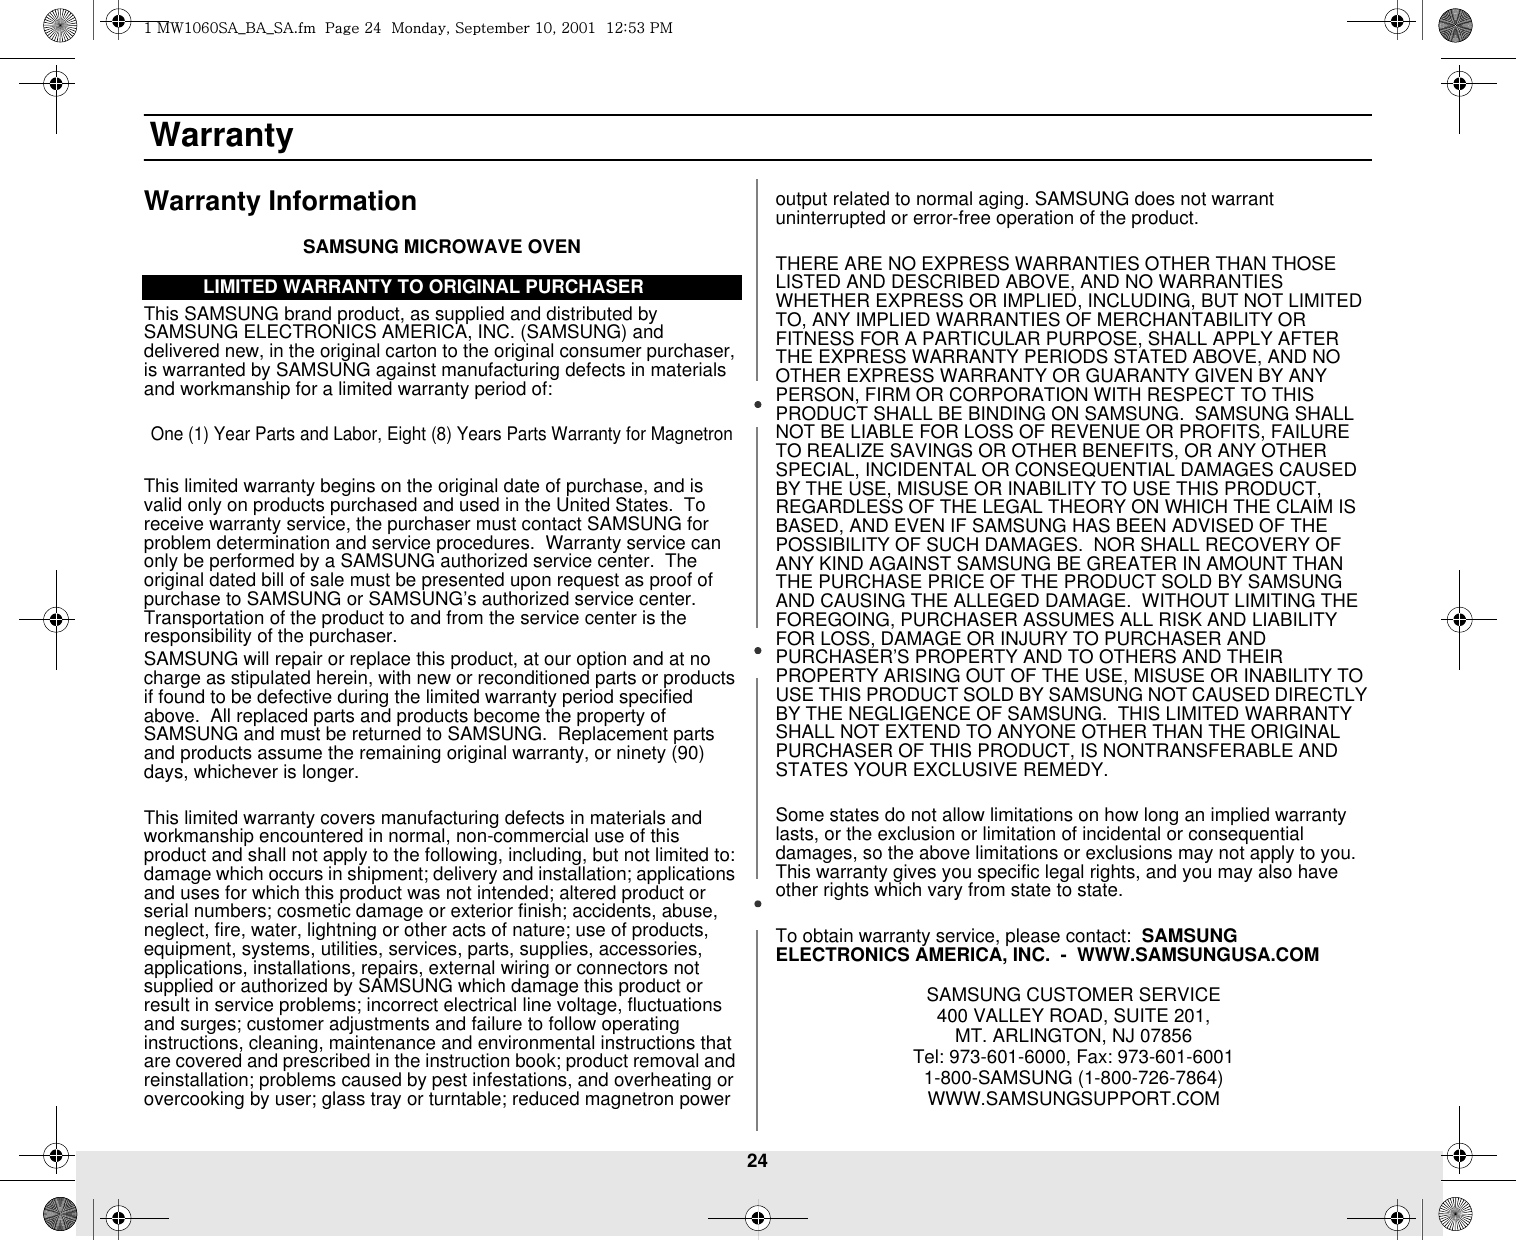 24 WarrantyWarranty InformationSAMSUNG MICROWAVE OVENThis SAMSUNG brand product, as supplied and distributed by SAMSUNG ELECTRONICS AMERICA, INC. (SAMSUNG) and delivered new, in the original carton to the original consumer purchaser, is warranted by SAMSUNG against manufacturing defects in materials and workmanship for a limited warranty period of:One (1) Year Parts and Labor, Eight (8) Years Parts Warranty for MagnetronThis limited warranty begins on the original date of purchase, and is valid only on products purchased and used in the United States.  To receive warranty service, the purchaser must contact SAMSUNG for problem determination and service procedures.  Warranty service can only be performed by a SAMSUNG authorized service center.  The original dated bill of sale must be presented upon request as proof of purchase to SAMSUNG or SAMSUNG’s authorized service center. Transportation of the product to and from the service center is the responsibility of the purchaser.SAMSUNG will repair or replace this product, at our option and at no charge as stipulated herein, with new or reconditioned parts or products if found to be defective during the limited warranty period specified above.  All replaced parts and products become the property of SAMSUNG and must be returned to SAMSUNG.  Replacement parts and products assume the remaining original warranty, or ninety (90) days, whichever is longer.This limited warranty covers manufacturing defects in materials and workmanship encountered in normal, non-commercial use of this product and shall not apply to the following, including, but not limited to: damage which occurs in shipment; delivery and installation; applications and uses for which this product was not intended; altered product or serial numbers; cosmetic damage or exterior finish; accidents, abuse, neglect, fire, water, lightning or other acts of nature; use of products, equipment, systems, utilities, services, parts, supplies, accessories, applications, installations, repairs, external wiring or connectors not supplied or authorized by SAMSUNG which damage this product or result in service problems; incorrect electrical line voltage, fluctuations and surges; customer adjustments and failure to follow operating instructions, cleaning, maintenance and environmental instructions that are covered and prescribed in the instruction book; product removal and reinstallation; problems caused by pest infestations, and overheating or overcooking by user; glass tray or turntable; reduced magnetron power output related to normal aging. SAMSUNG does not warrant uninterrupted or error-free operation of the product.THERE ARE NO EXPRESS WARRANTIES OTHER THAN THOSE LISTED AND DESCRIBED ABOVE, AND NO WARRANTIES WHETHER EXPRESS OR IMPLIED, INCLUDING, BUT NOT LIMITED TO, ANY IMPLIED WARRANTIES OF MERCHANTABILITY OR FITNESS FOR A PARTICULAR PURPOSE, SHALL APPLY AFTER THE EXPRESS WARRANTY PERIODS STATED ABOVE, AND NO OTHER EXPRESS WARRANTY OR GUARANTY GIVEN BY ANY PERSON, FIRM OR CORPORATION WITH RESPECT TO THIS PRODUCT SHALL BE BINDING ON SAMSUNG.  SAMSUNG SHALL NOT BE LIABLE FOR LOSS OF REVENUE OR PROFITS, FAILURE TO REALIZE SAVINGS OR OTHER BENEFITS, OR ANY OTHER SPECIAL, INCIDENTAL OR CONSEQUENTIAL DAMAGES CAUSED BY THE USE, MISUSE OR INABILITY TO USE THIS PRODUCT, REGARDLESS OF THE LEGAL THEORY ON WHICH THE CLAIM IS BASED, AND EVEN IF SAMSUNG HAS BEEN ADVISED OF THE POSSIBILITY OF SUCH DAMAGES.  NOR SHALL RECOVERY OF ANY KIND AGAINST SAMSUNG BE GREATER IN AMOUNT THAN THE PURCHASE PRICE OF THE PRODUCT SOLD BY SAMSUNG AND CAUSING THE ALLEGED DAMAGE.  WITHOUT LIMITING THE FOREGOING, PURCHASER ASSUMES ALL RISK AND LIABILITY FOR LOSS, DAMAGE OR INJURY TO PURCHASER AND PURCHASER’S PROPERTY AND TO OTHERS AND THEIR PROPERTY ARISING OUT OF THE USE, MISUSE OR INABILITY TO USE THIS PRODUCT SOLD BY SAMSUNG NOT CAUSED DIRECTLY BY THE NEGLIGENCE OF SAMSUNG.  THIS LIMITED WARRANTY SHALL NOT EXTEND TO ANYONE OTHER THAN THE ORIGINAL PURCHASER OF THIS PRODUCT, IS NONTRANSFERABLE AND STATES YOUR EXCLUSIVE REMEDY.Some states do not allow limitations on how long an implied warranty lasts, or the exclusion or limitation of incidental or consequential damages, so the above limitations or exclusions may not apply to you.  This warranty gives you specific legal rights, and you may also have other rights which vary from state to state.To obtain warranty service, please contact:  SAMSUNG ELECTRONICS AMERICA, INC.  -  WWW.SAMSUNGUSA.COMSAMSUNG CUSTOMER SERVICE  400 VALLEY ROAD, SUITE 201, MT. ARLINGTON, NJ 07856Tel: 973-601-6000, Fax: 973-601-60011-800-SAMSUNG (1-800-726-7864)WWW.SAMSUNGSUPPORT.COMLIMITED WARRANTY TO ORIGINAL PURCHASERXGt~XW]WzhihzhUGGwGY[GGtSGzGXWSGYWWXGGXYa\ZGwt